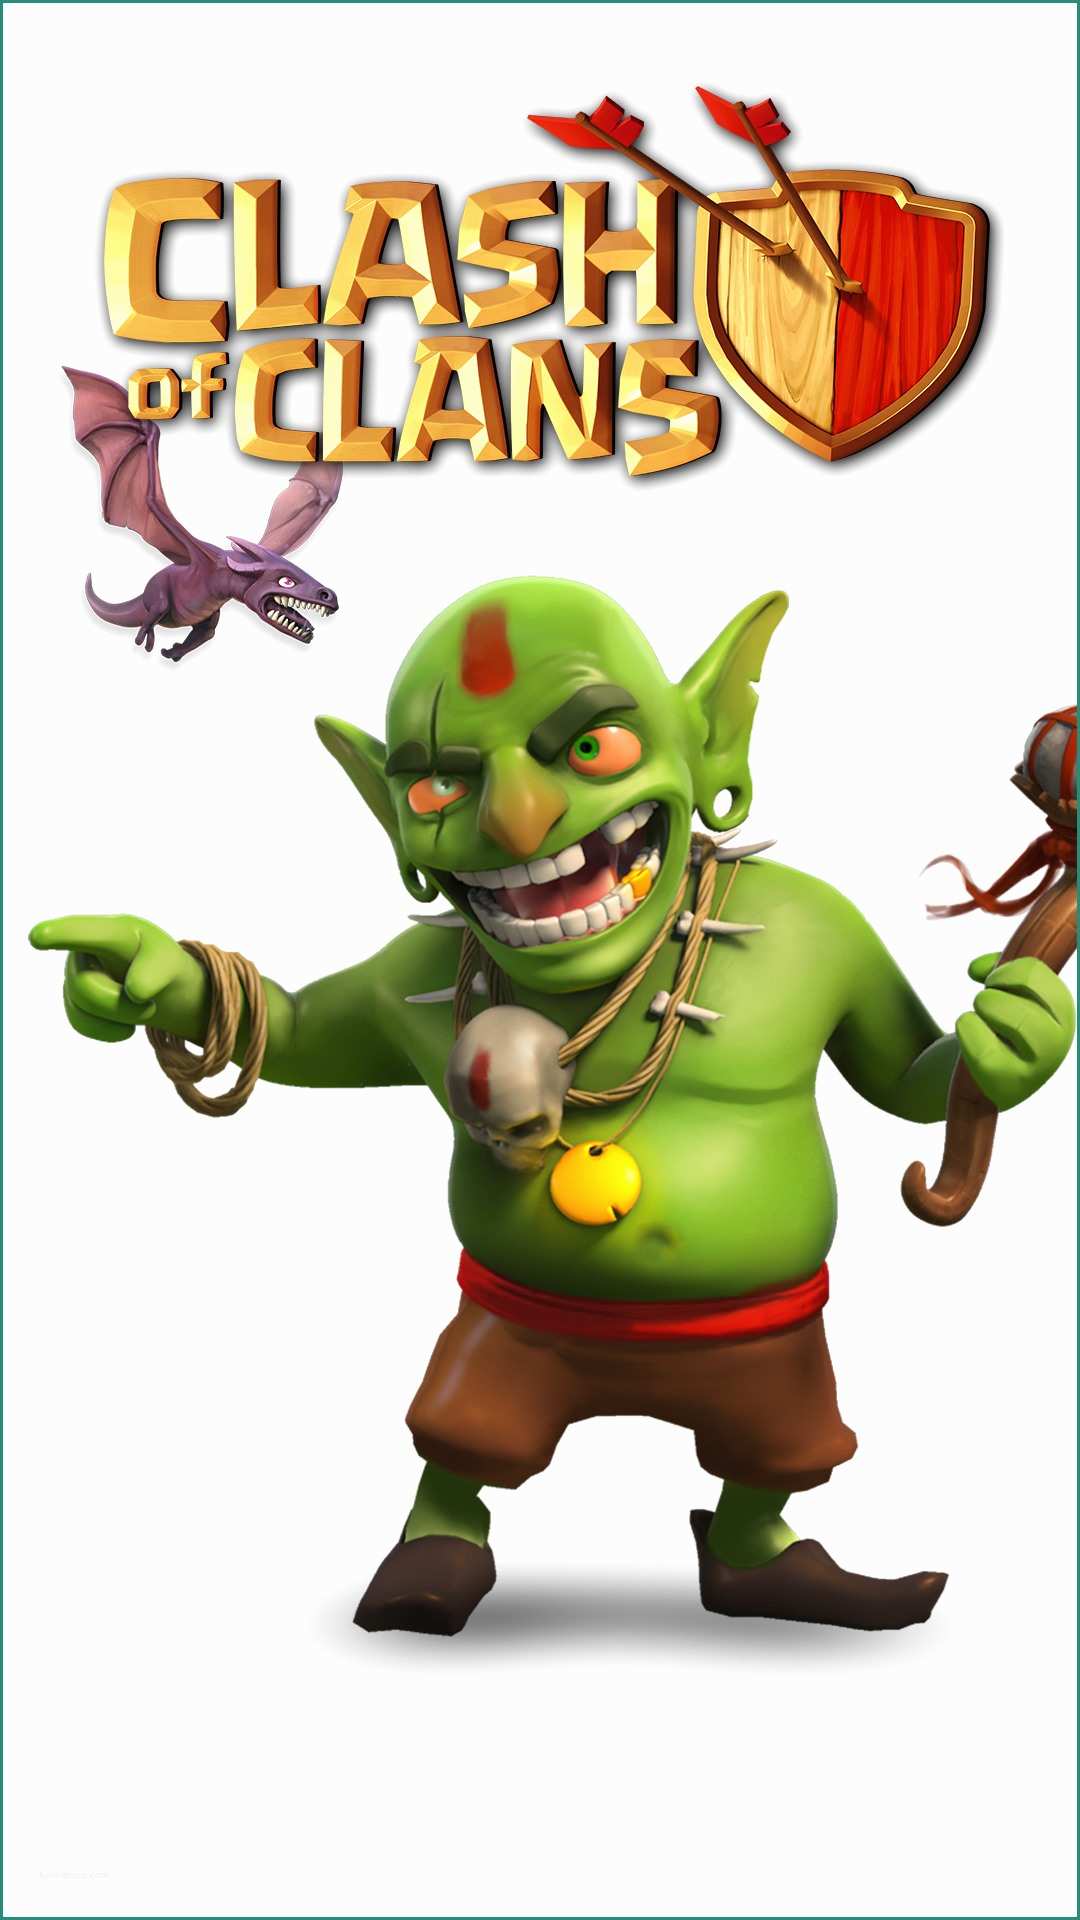 Sfondi Clash Of Clans Hd E Clash Clans Wallpapers Hdq - Clash Of Clans Goblin Png , HD Wallpaper & Backgrounds